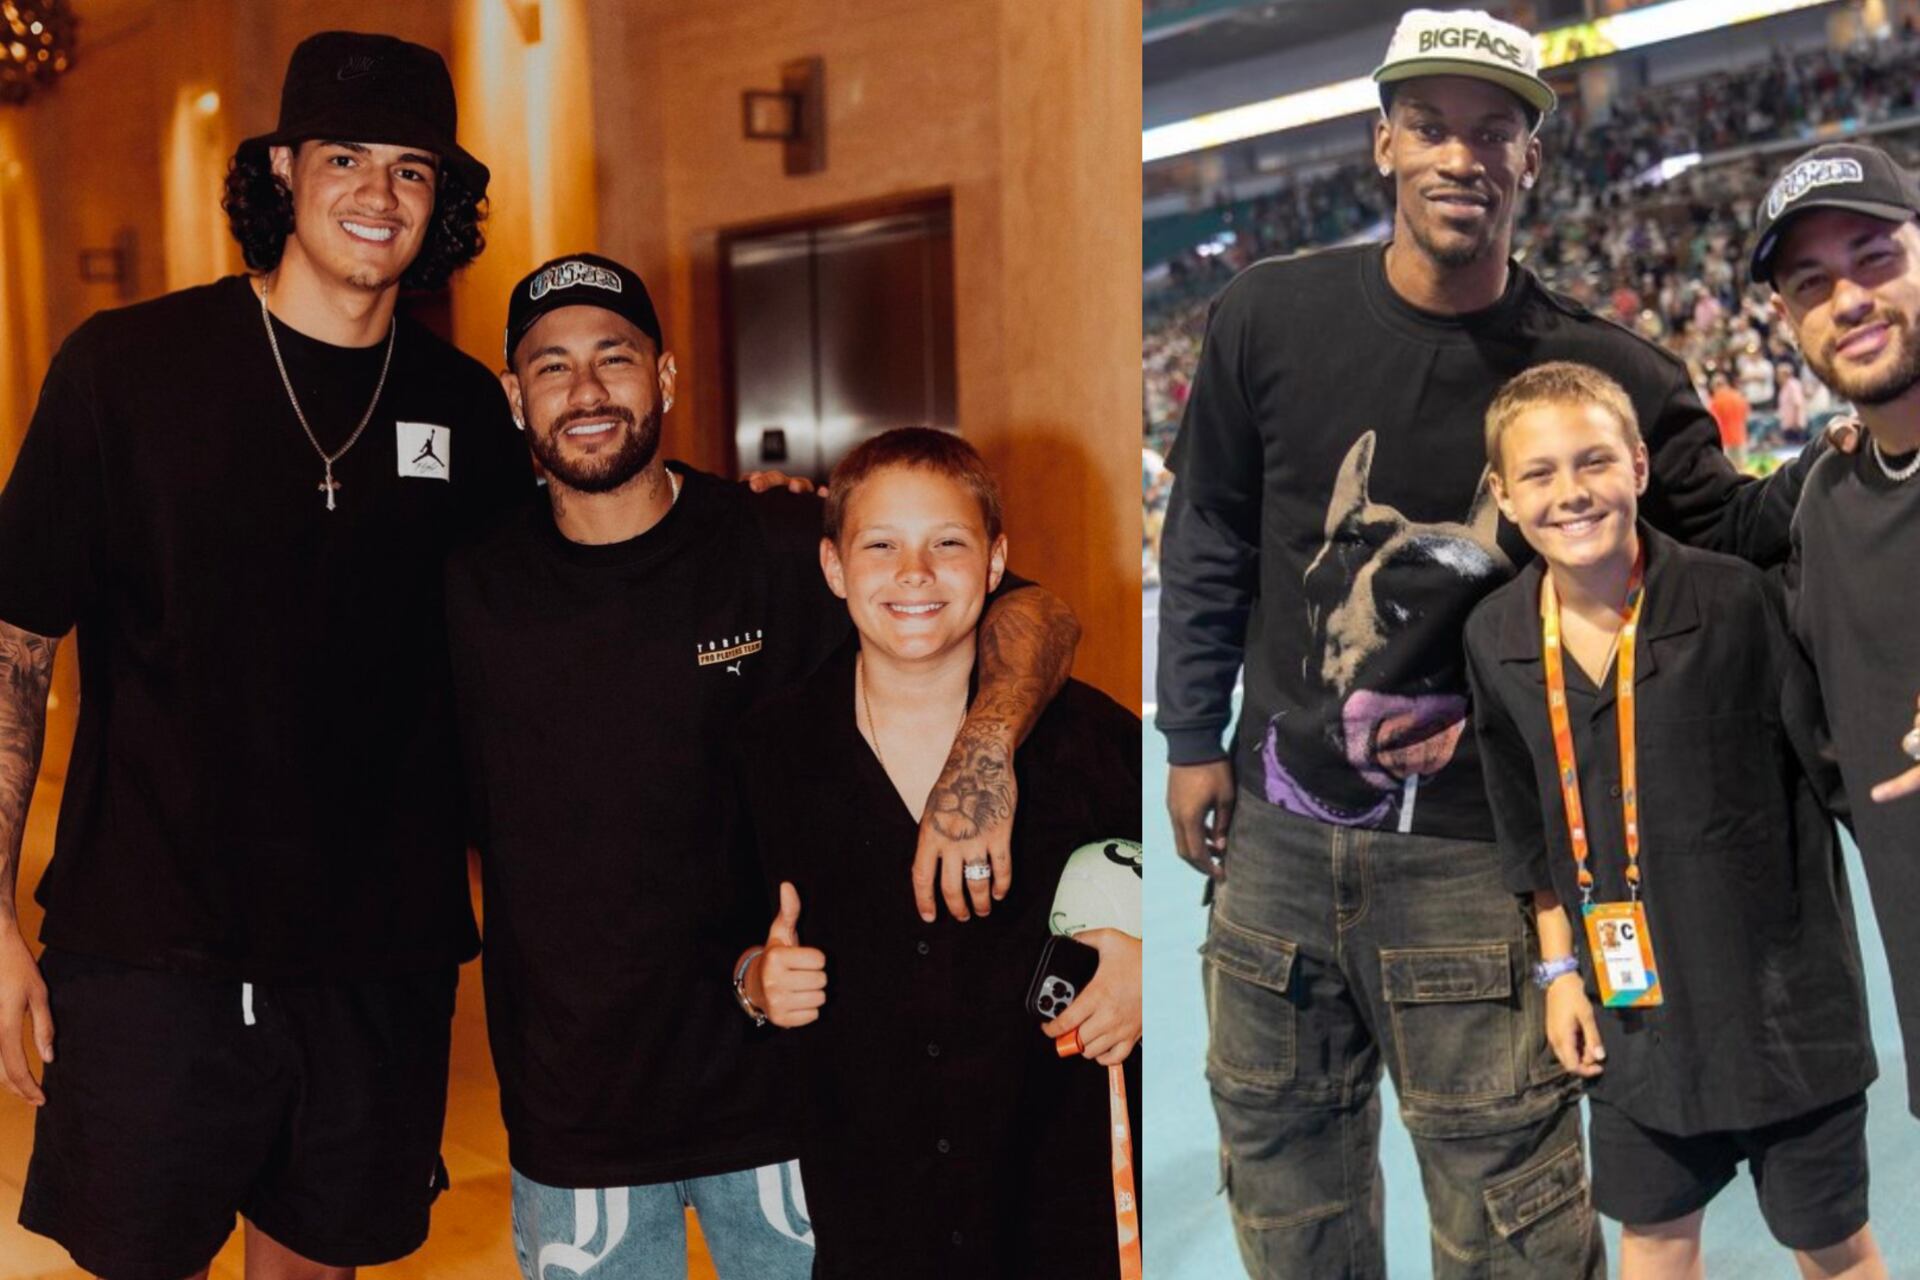 Neymar takes over the NBA as he watched a game and met some big NBA stars